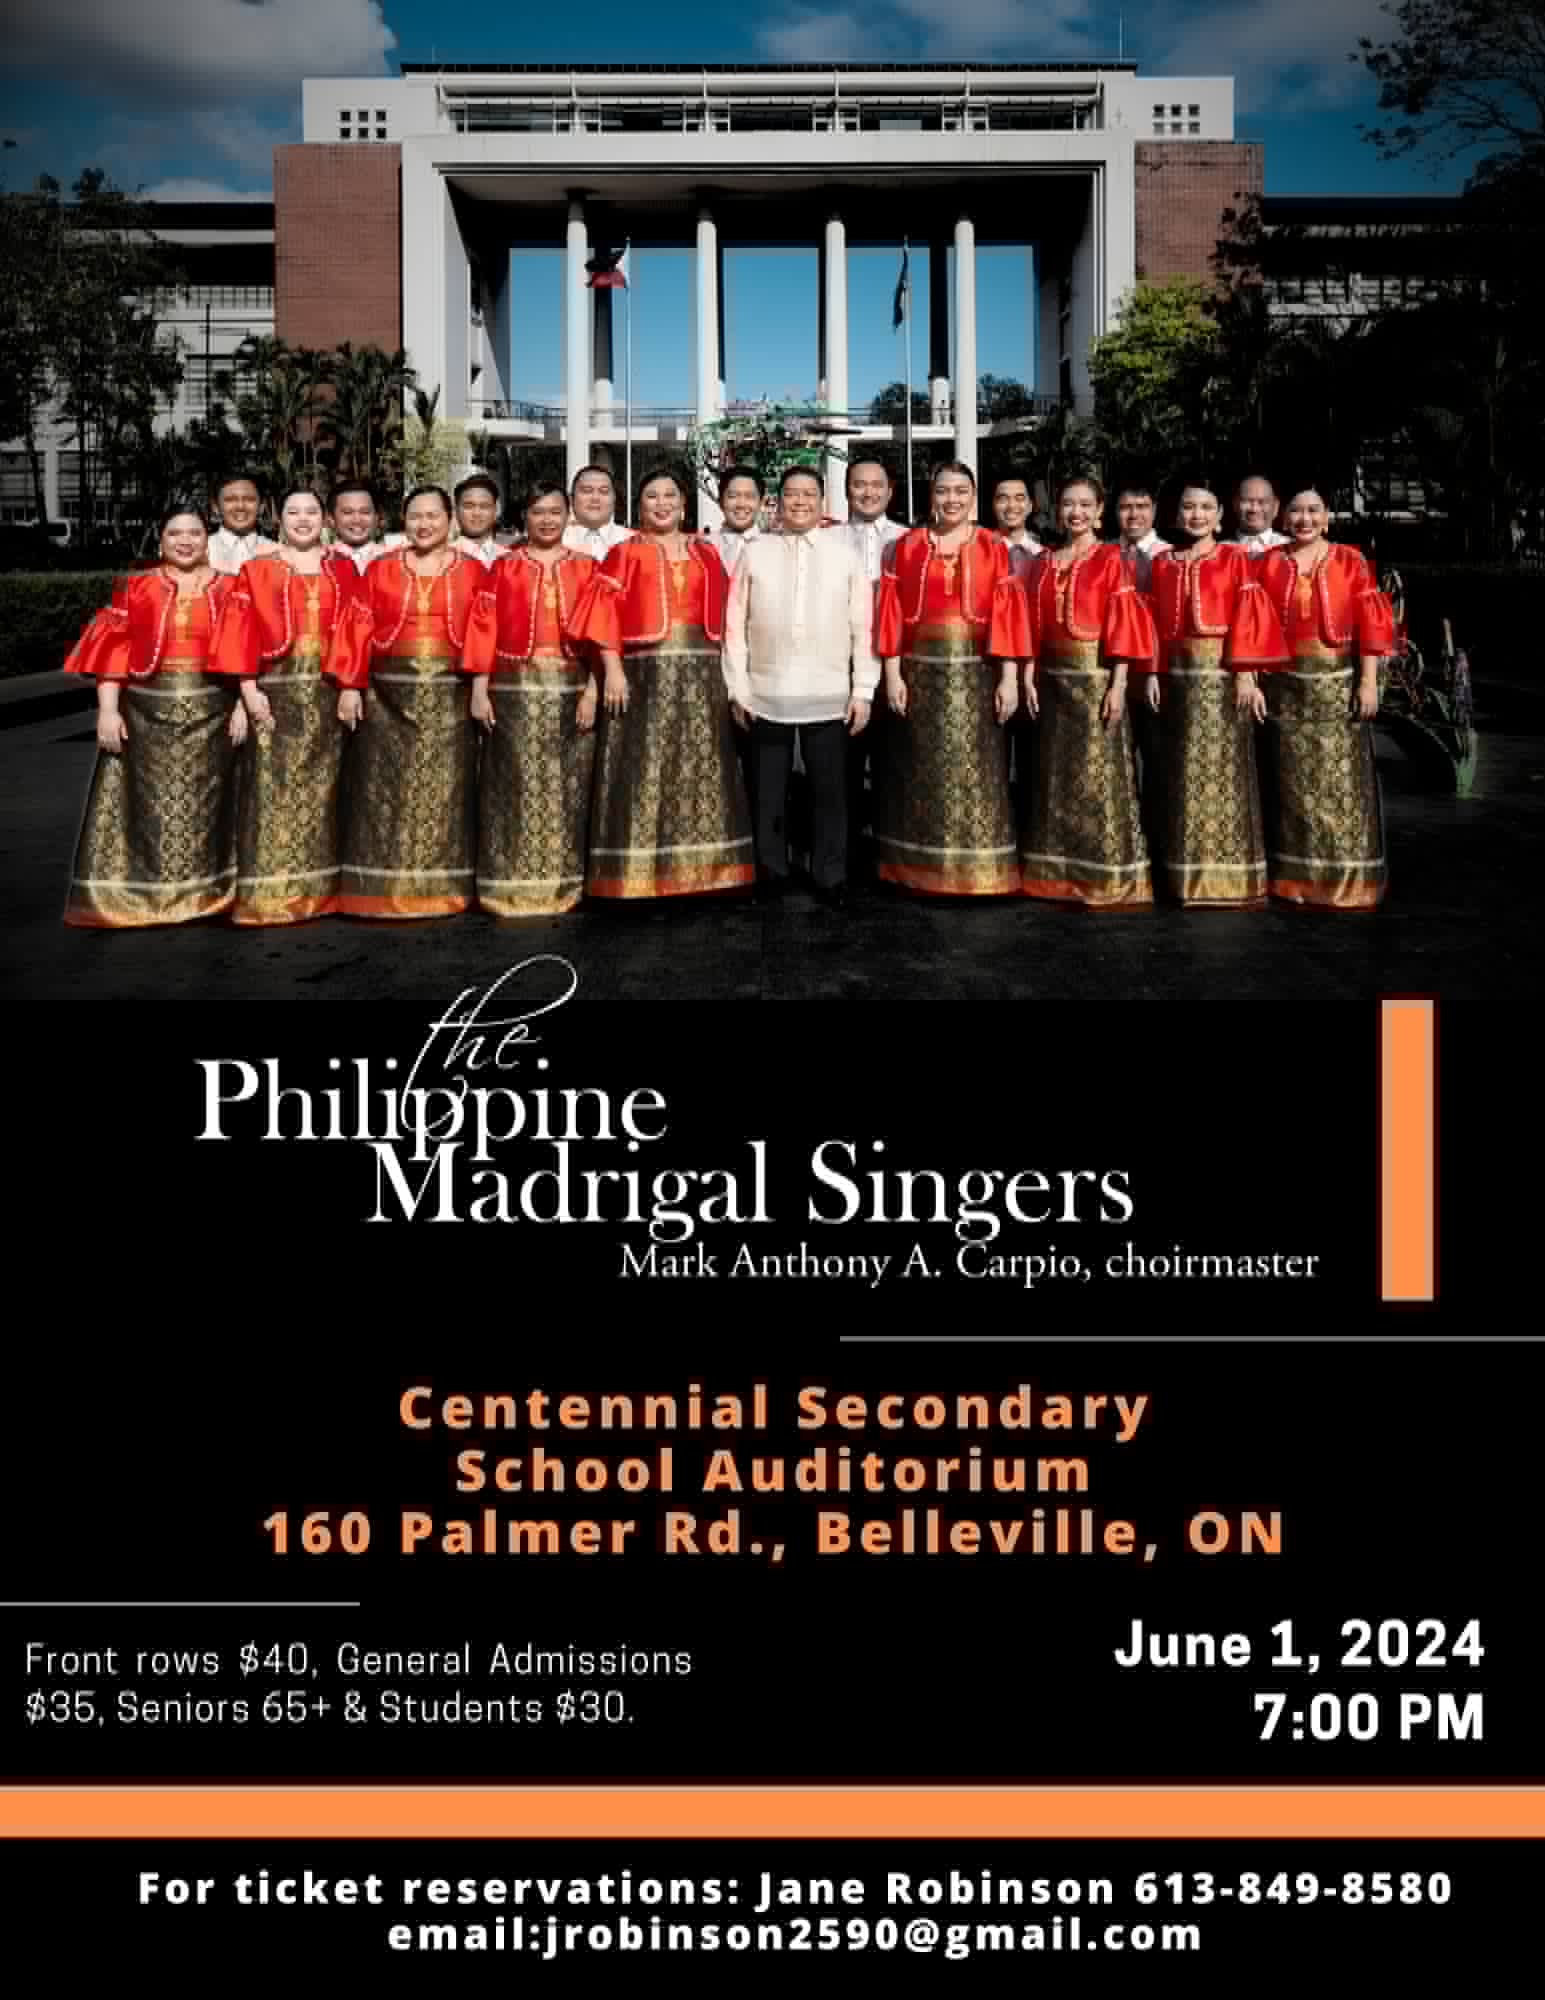 Poster with photos os singers and event title.